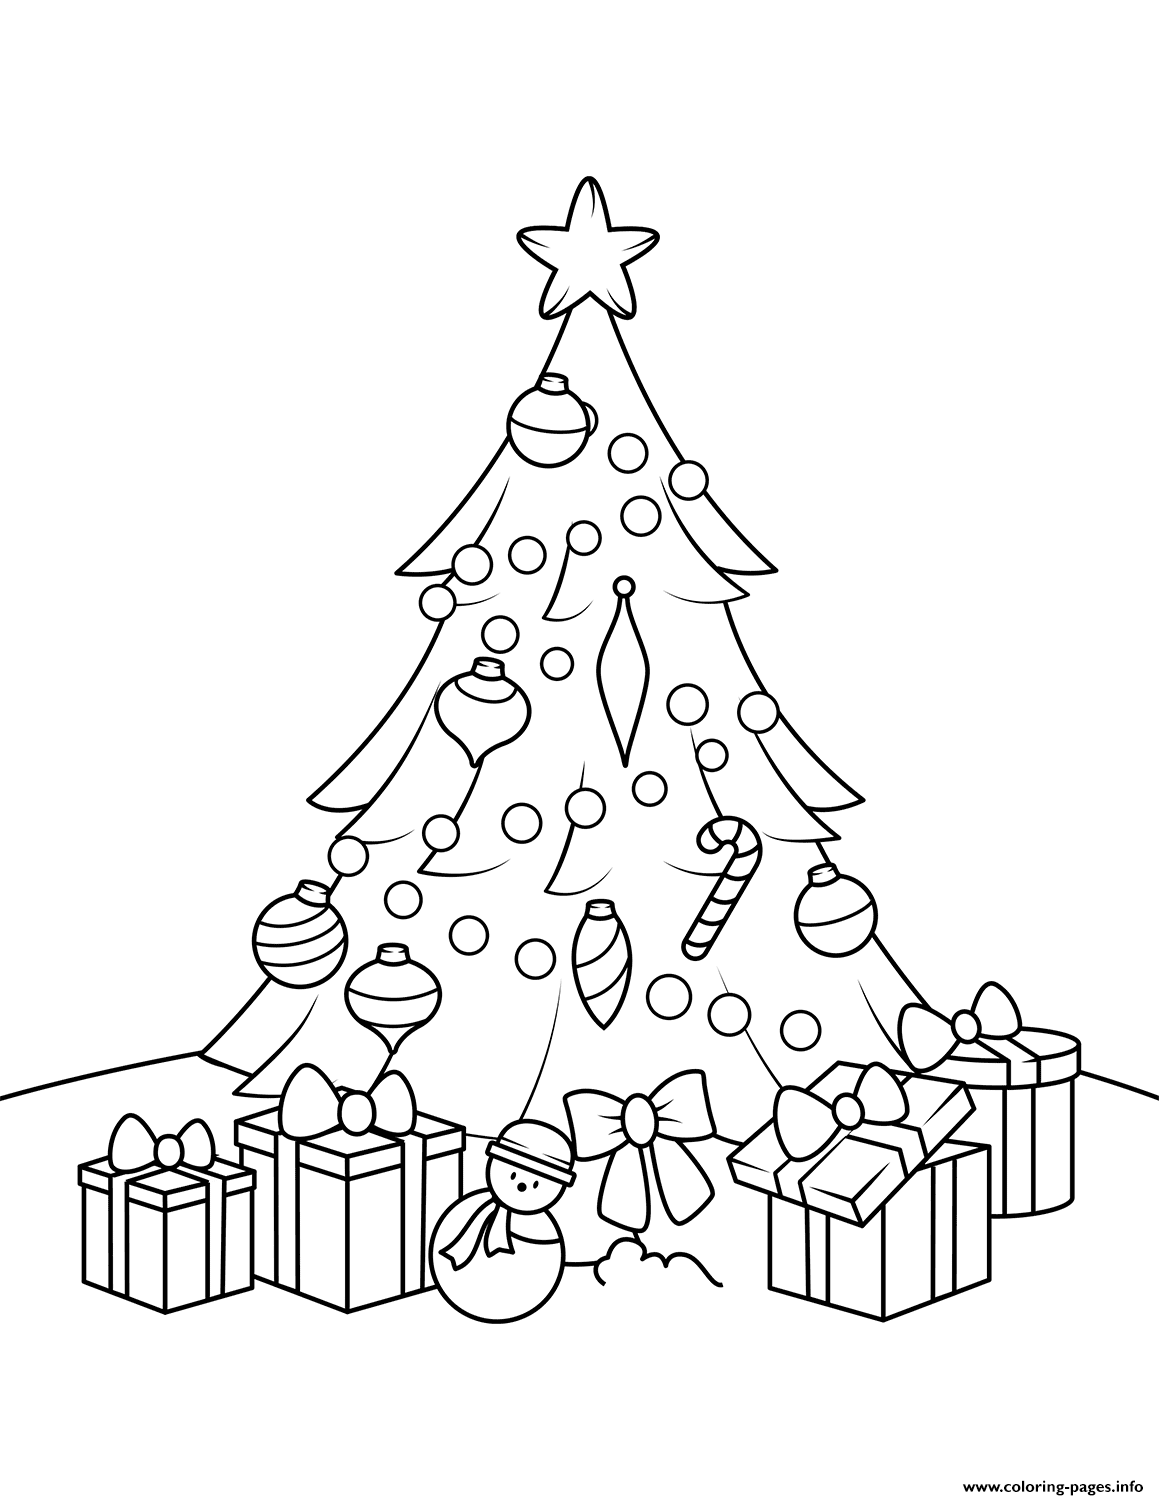 Christmas Tree With Presents Coloring Pages Printable Christmas Presents Coloring Sheets